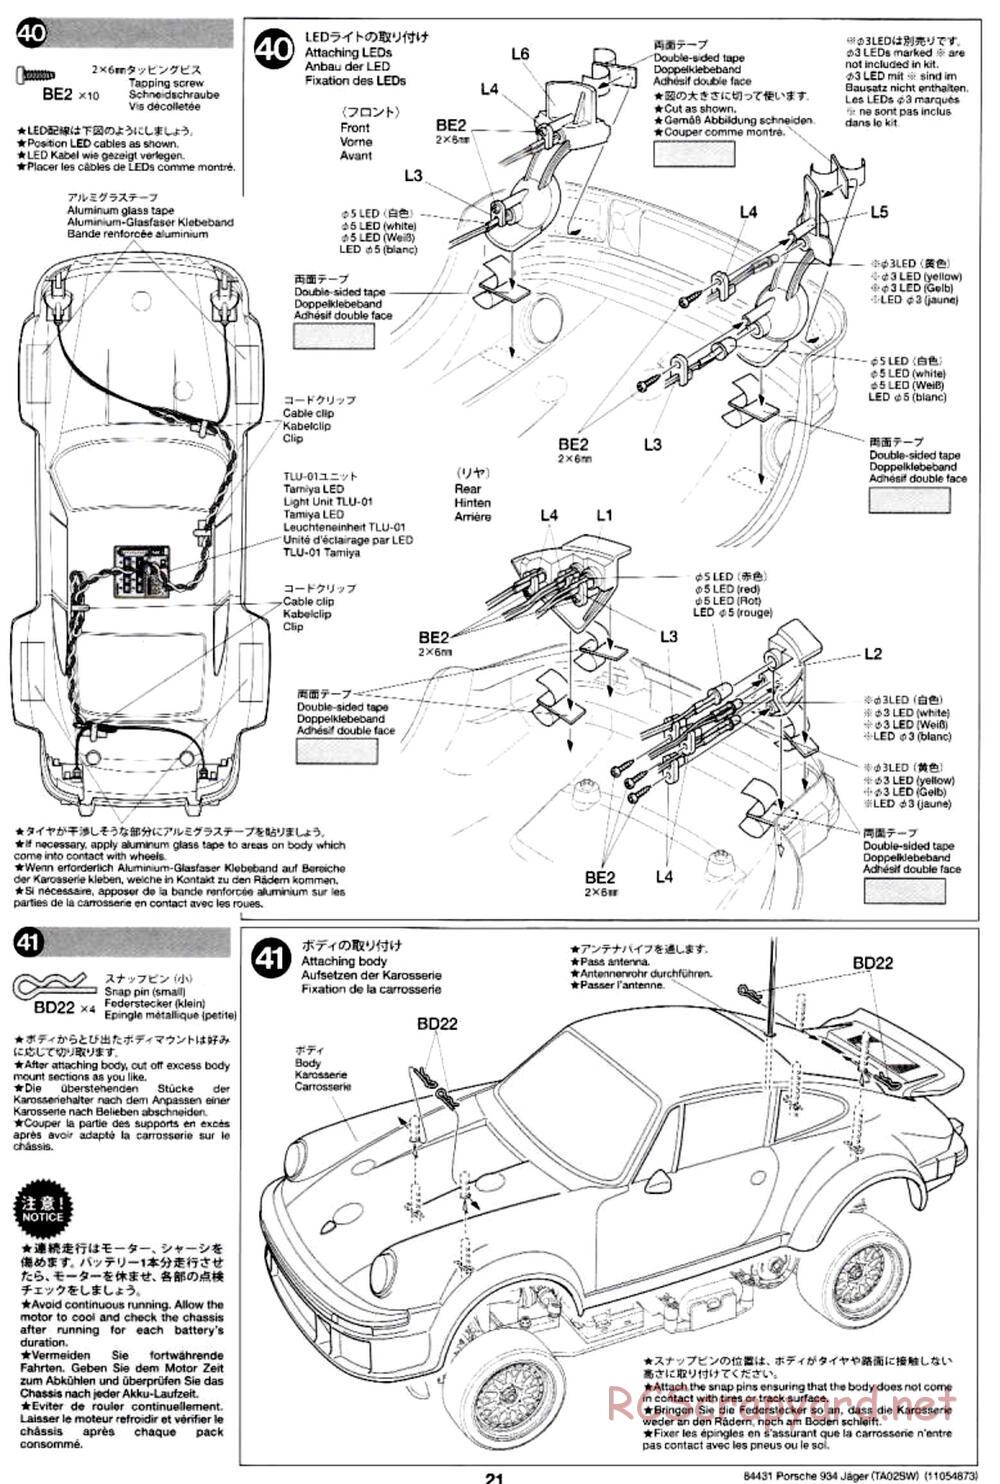 Tamiya - Porsche Turbo RSR Type 934 Jagermeister - TA-02SW Chassis - Manual - Page 21